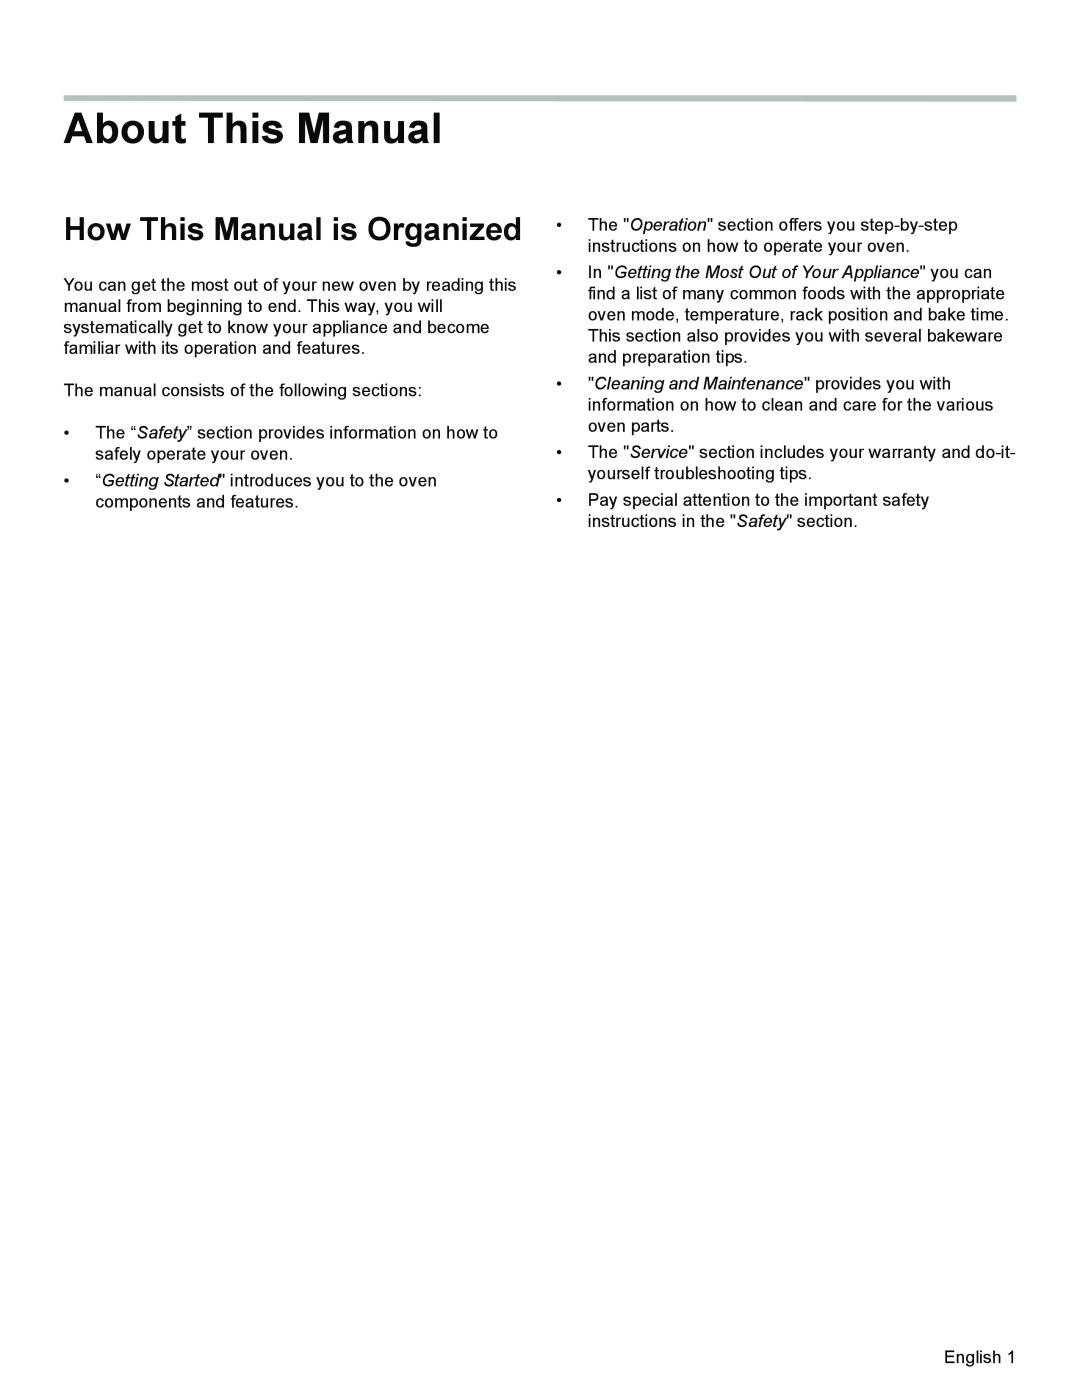 Bosch Appliances HGS3053UC manual About This Manual, How This Manual is Organized 